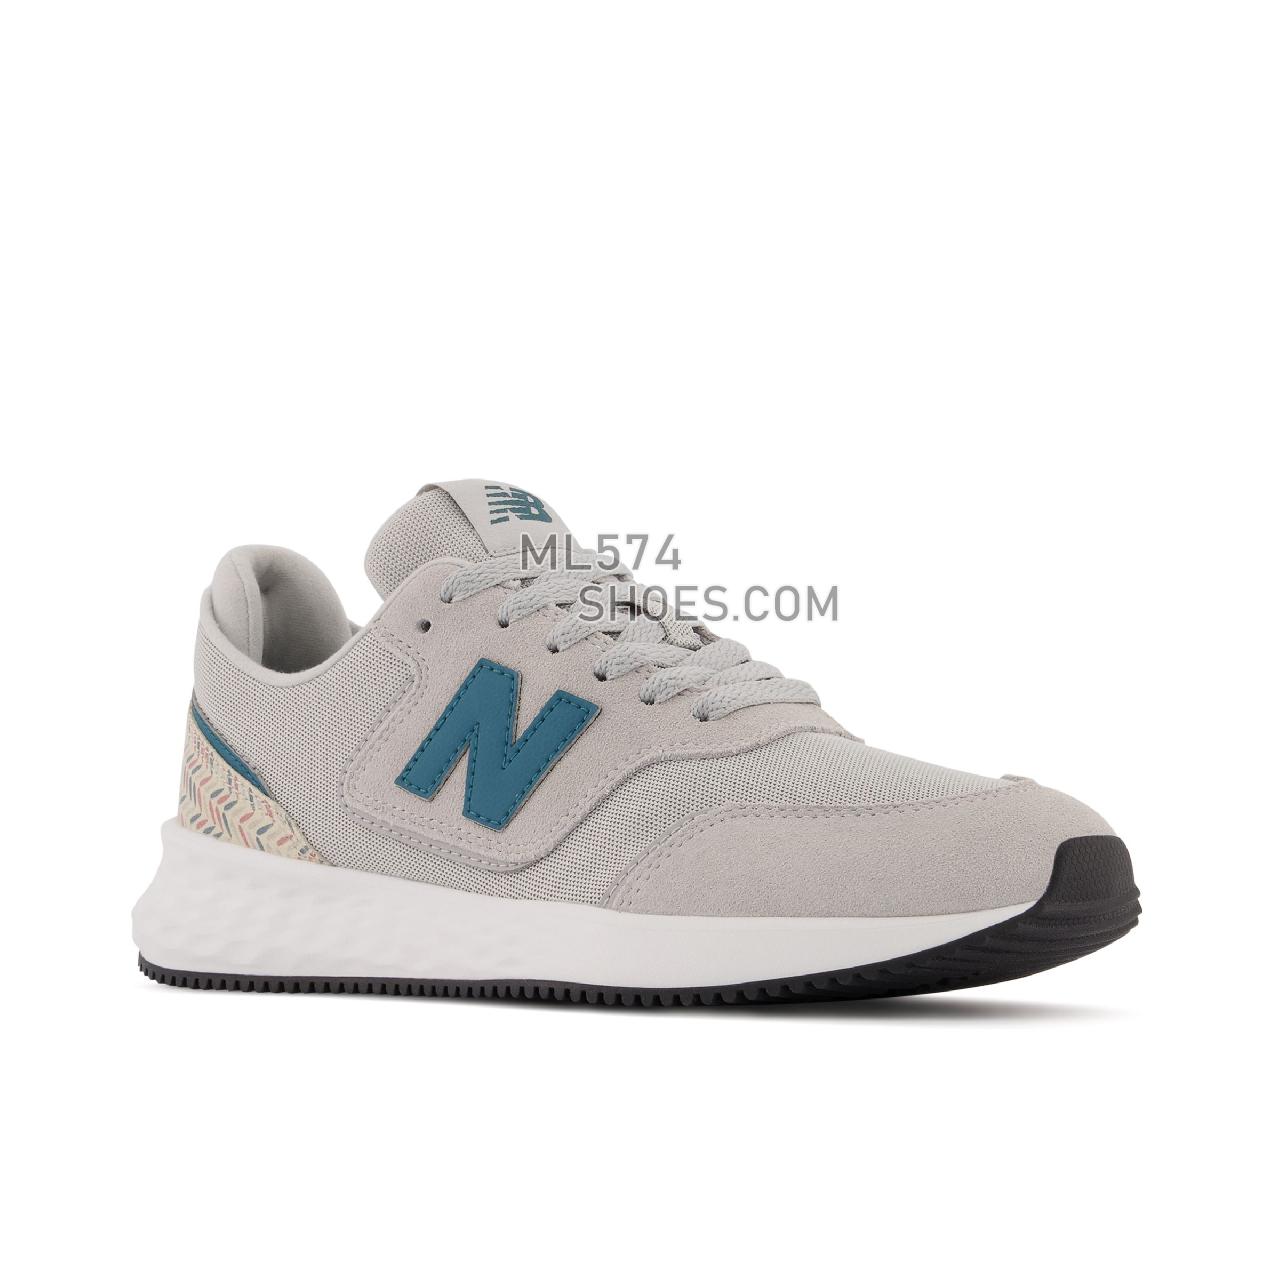 New Balance Fresh Foam X70 - Women's Sport Style Sneakers - Rain Cloud with Mountain Teal and White - WSX70GH1